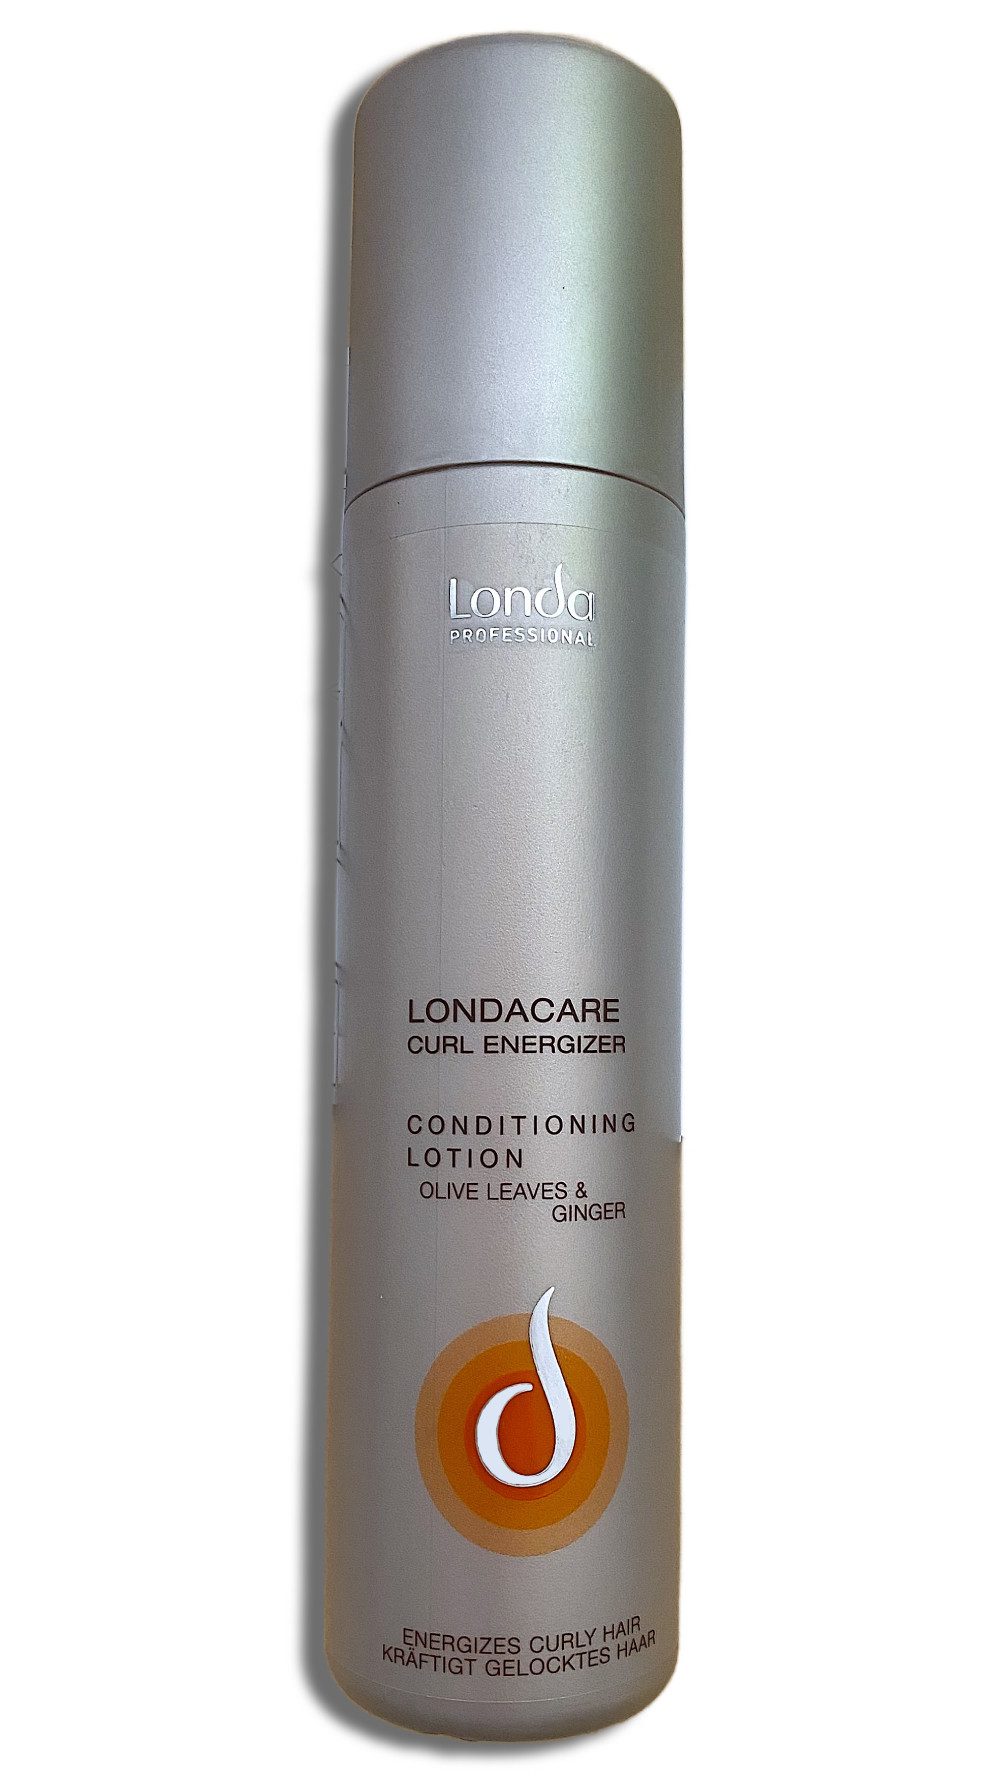 Londa Professional Haarpflege-Spray Curl Energizer Condition Lotion Olive Leaves & Ginger